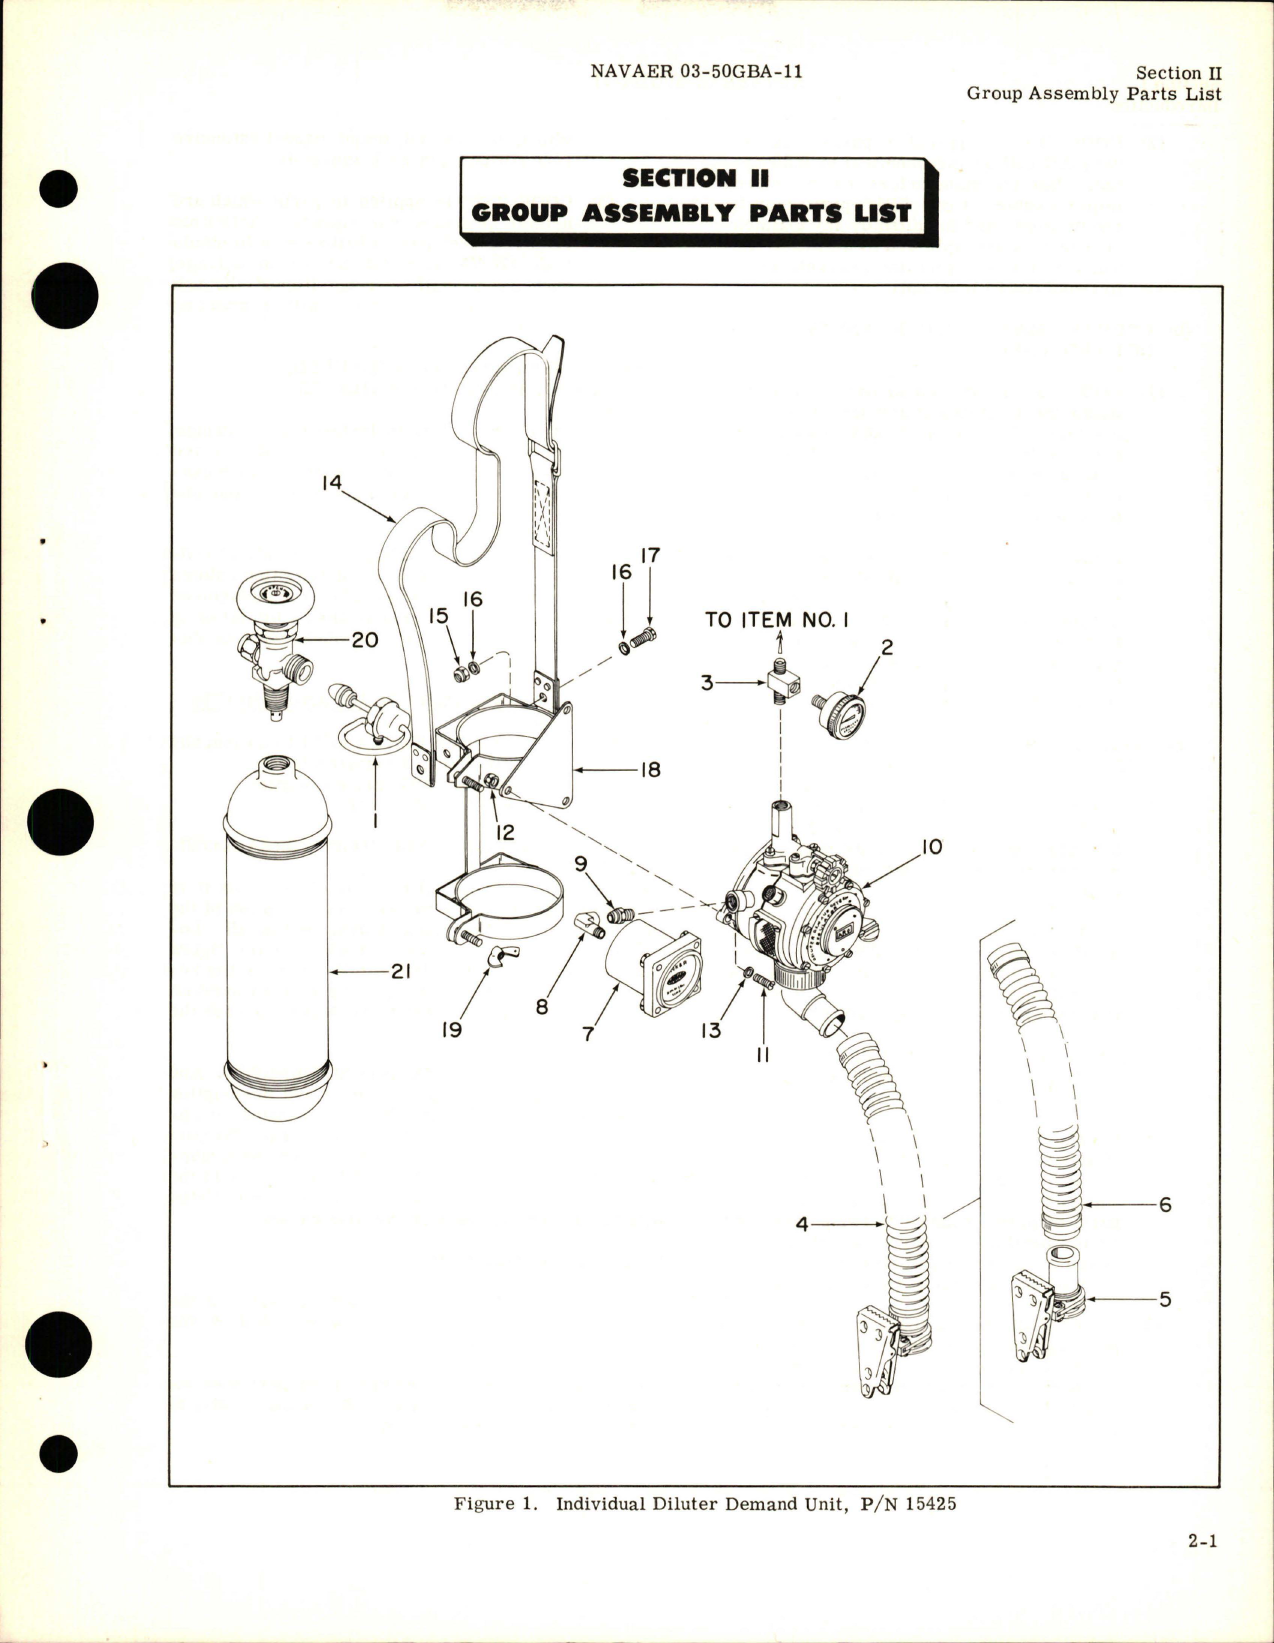 Sample page 5 from AirCorps Library document: Illustrated Parts Breakdown for Portable High Pressure Oxygen Unit - Part 15425 